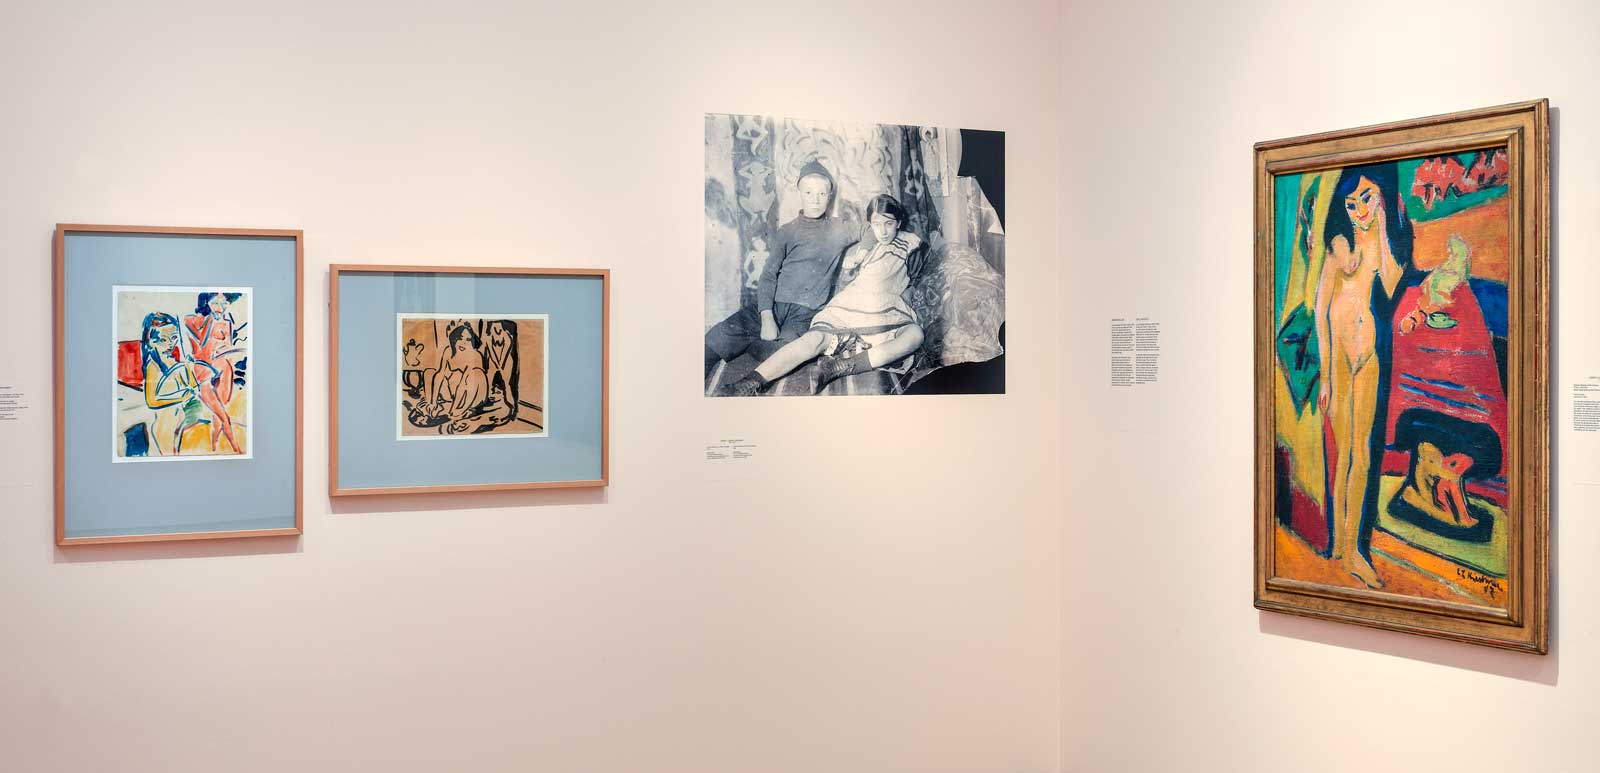 Exhibition view of Kirchner and Nolde: Expressionism. Colonialism, 2021, photo by Gert-Jan van Rooij, © Stedelijk Museum Amsterdam. Left to right: Ernst Ludwig Kirchner, Fränzi mit Bogen und Akt, 1910, watercolor on paper, 45 x 35 cm. Brücke-Museum, Berlin; Ernst Ludwig Kirchner, Hockender Mädchenakt, 1909-1910, ink on paper, 34 x 44 cm, Brücke-Museum, Berlin; Ernst Ludwig Kirchner’s photograph of Fränzi Fehrmann and Peter, Dresden, 1910, photograph, 13 x 18 cm, donation of the Estate of Ernst Ludwig Kirchner, 2001, Kirchner Museum Davos; Ernst Ludwig Kirchner, Nacktes Mädchen hinter Vorhang (Fränzi), 1910-1926, oil on canvas, 120 x 90 cm, Stedelijk Museum Amsterdam.